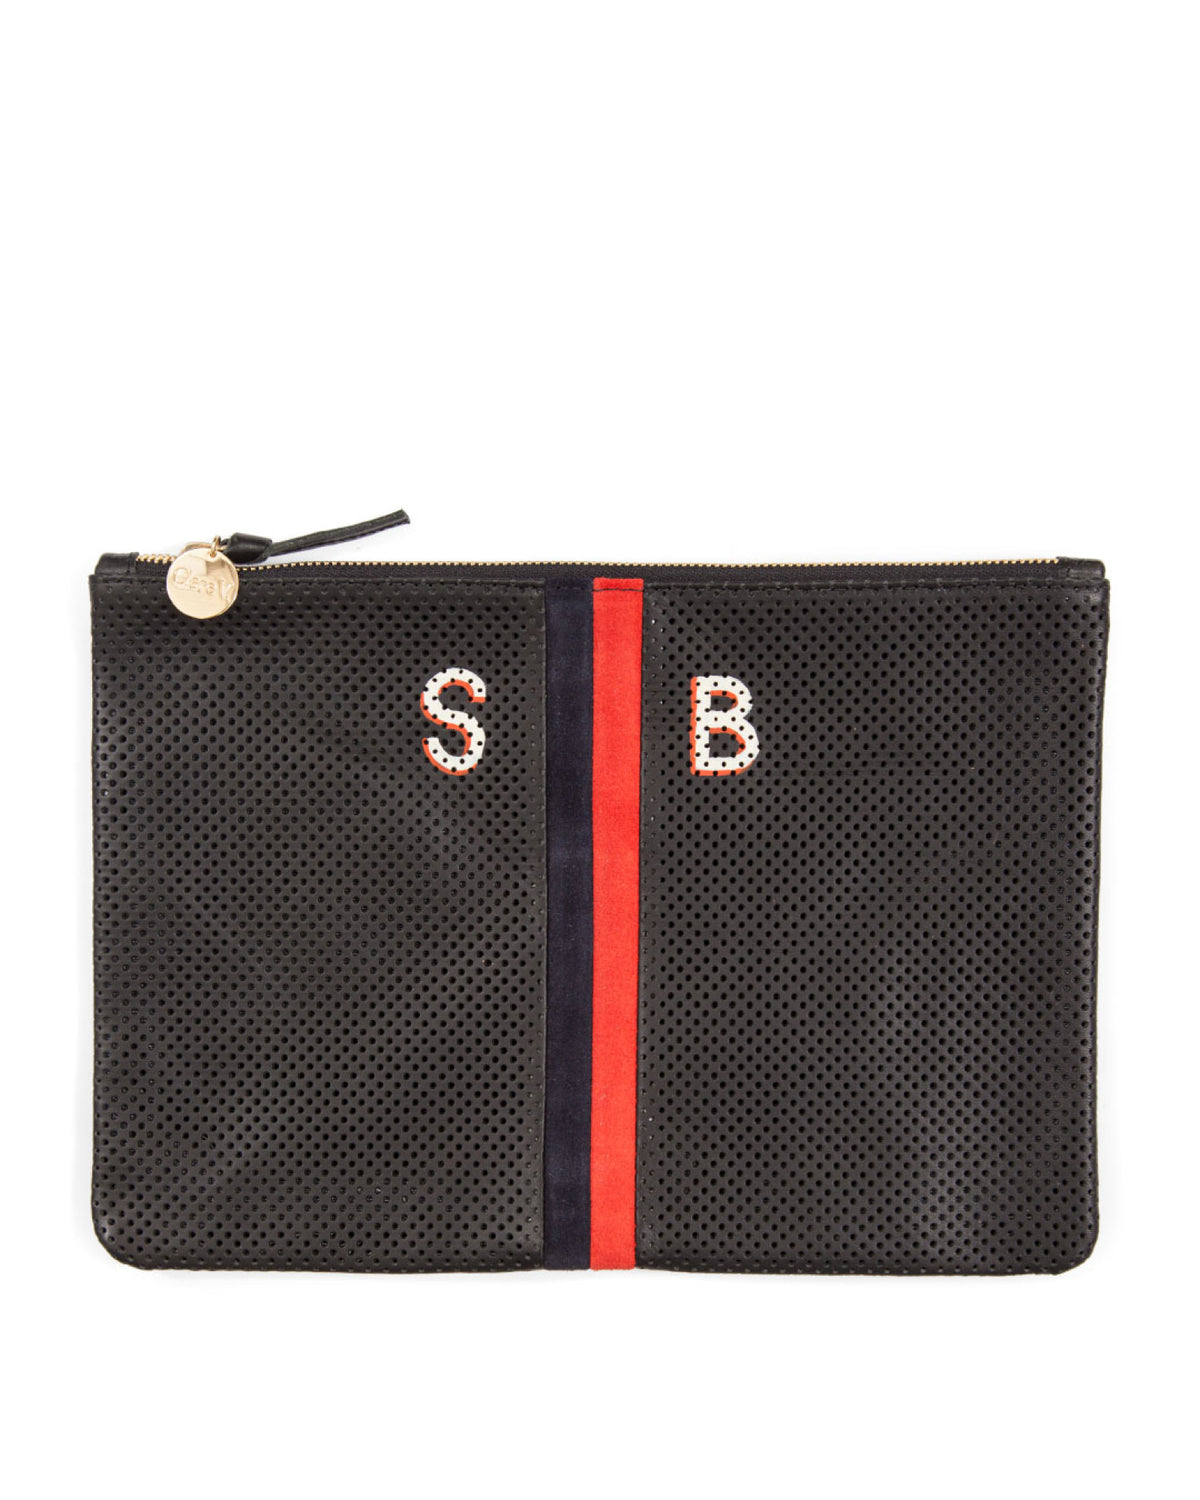 Black Perf Flat Clutch with 1 Inch Hand Painted Letters, Top Center.